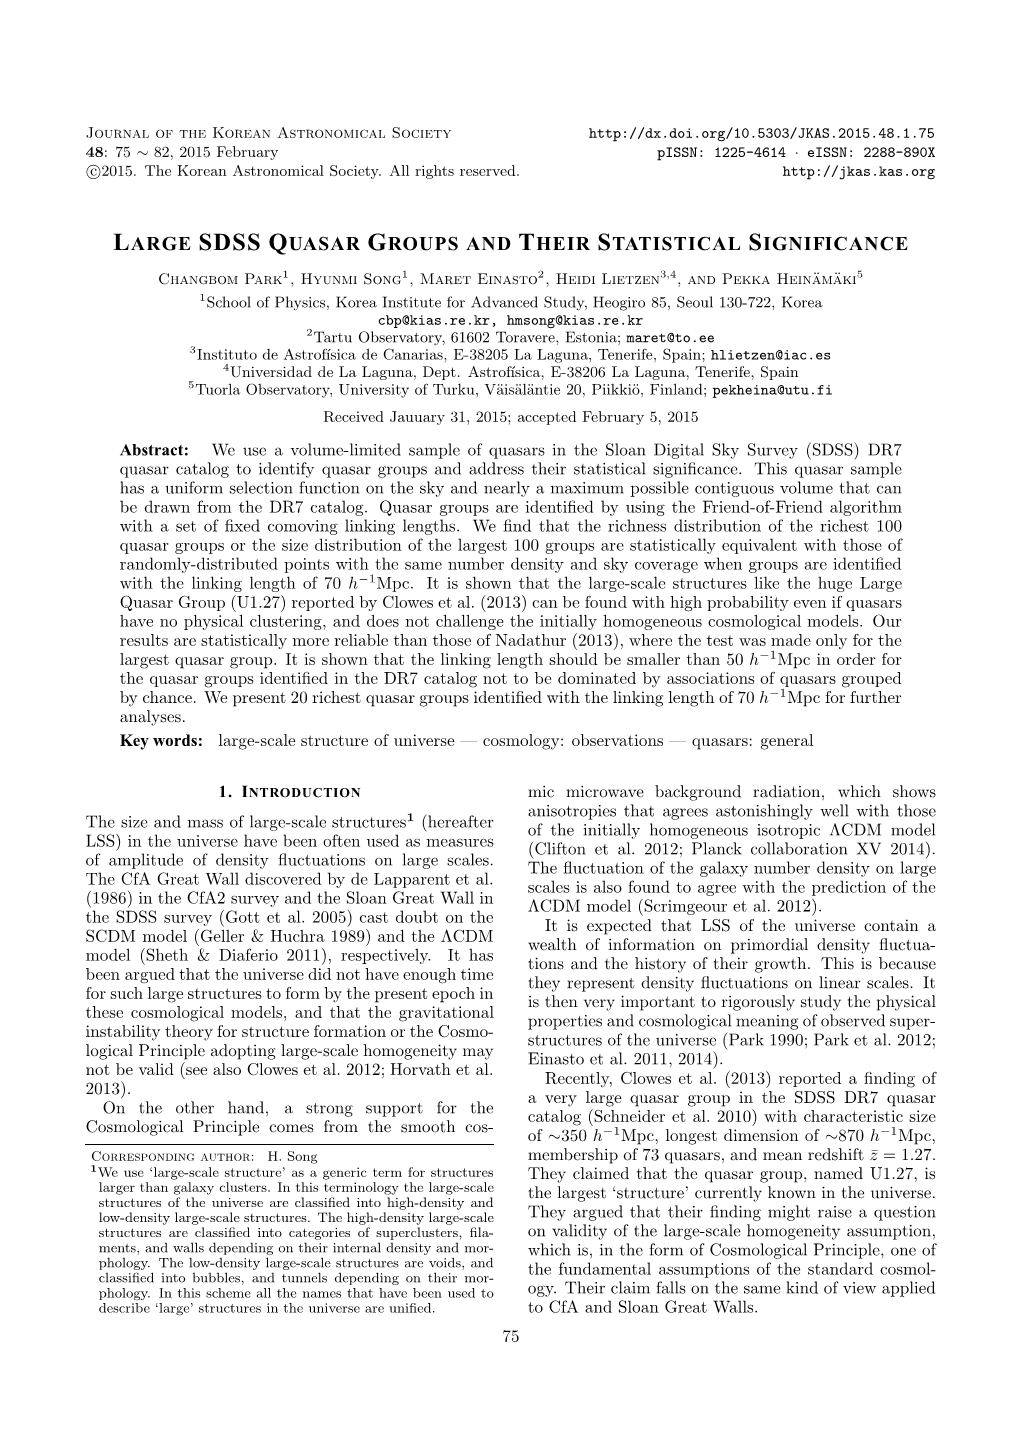 Large Sdss Quasar Groups and Their Statistical Significance